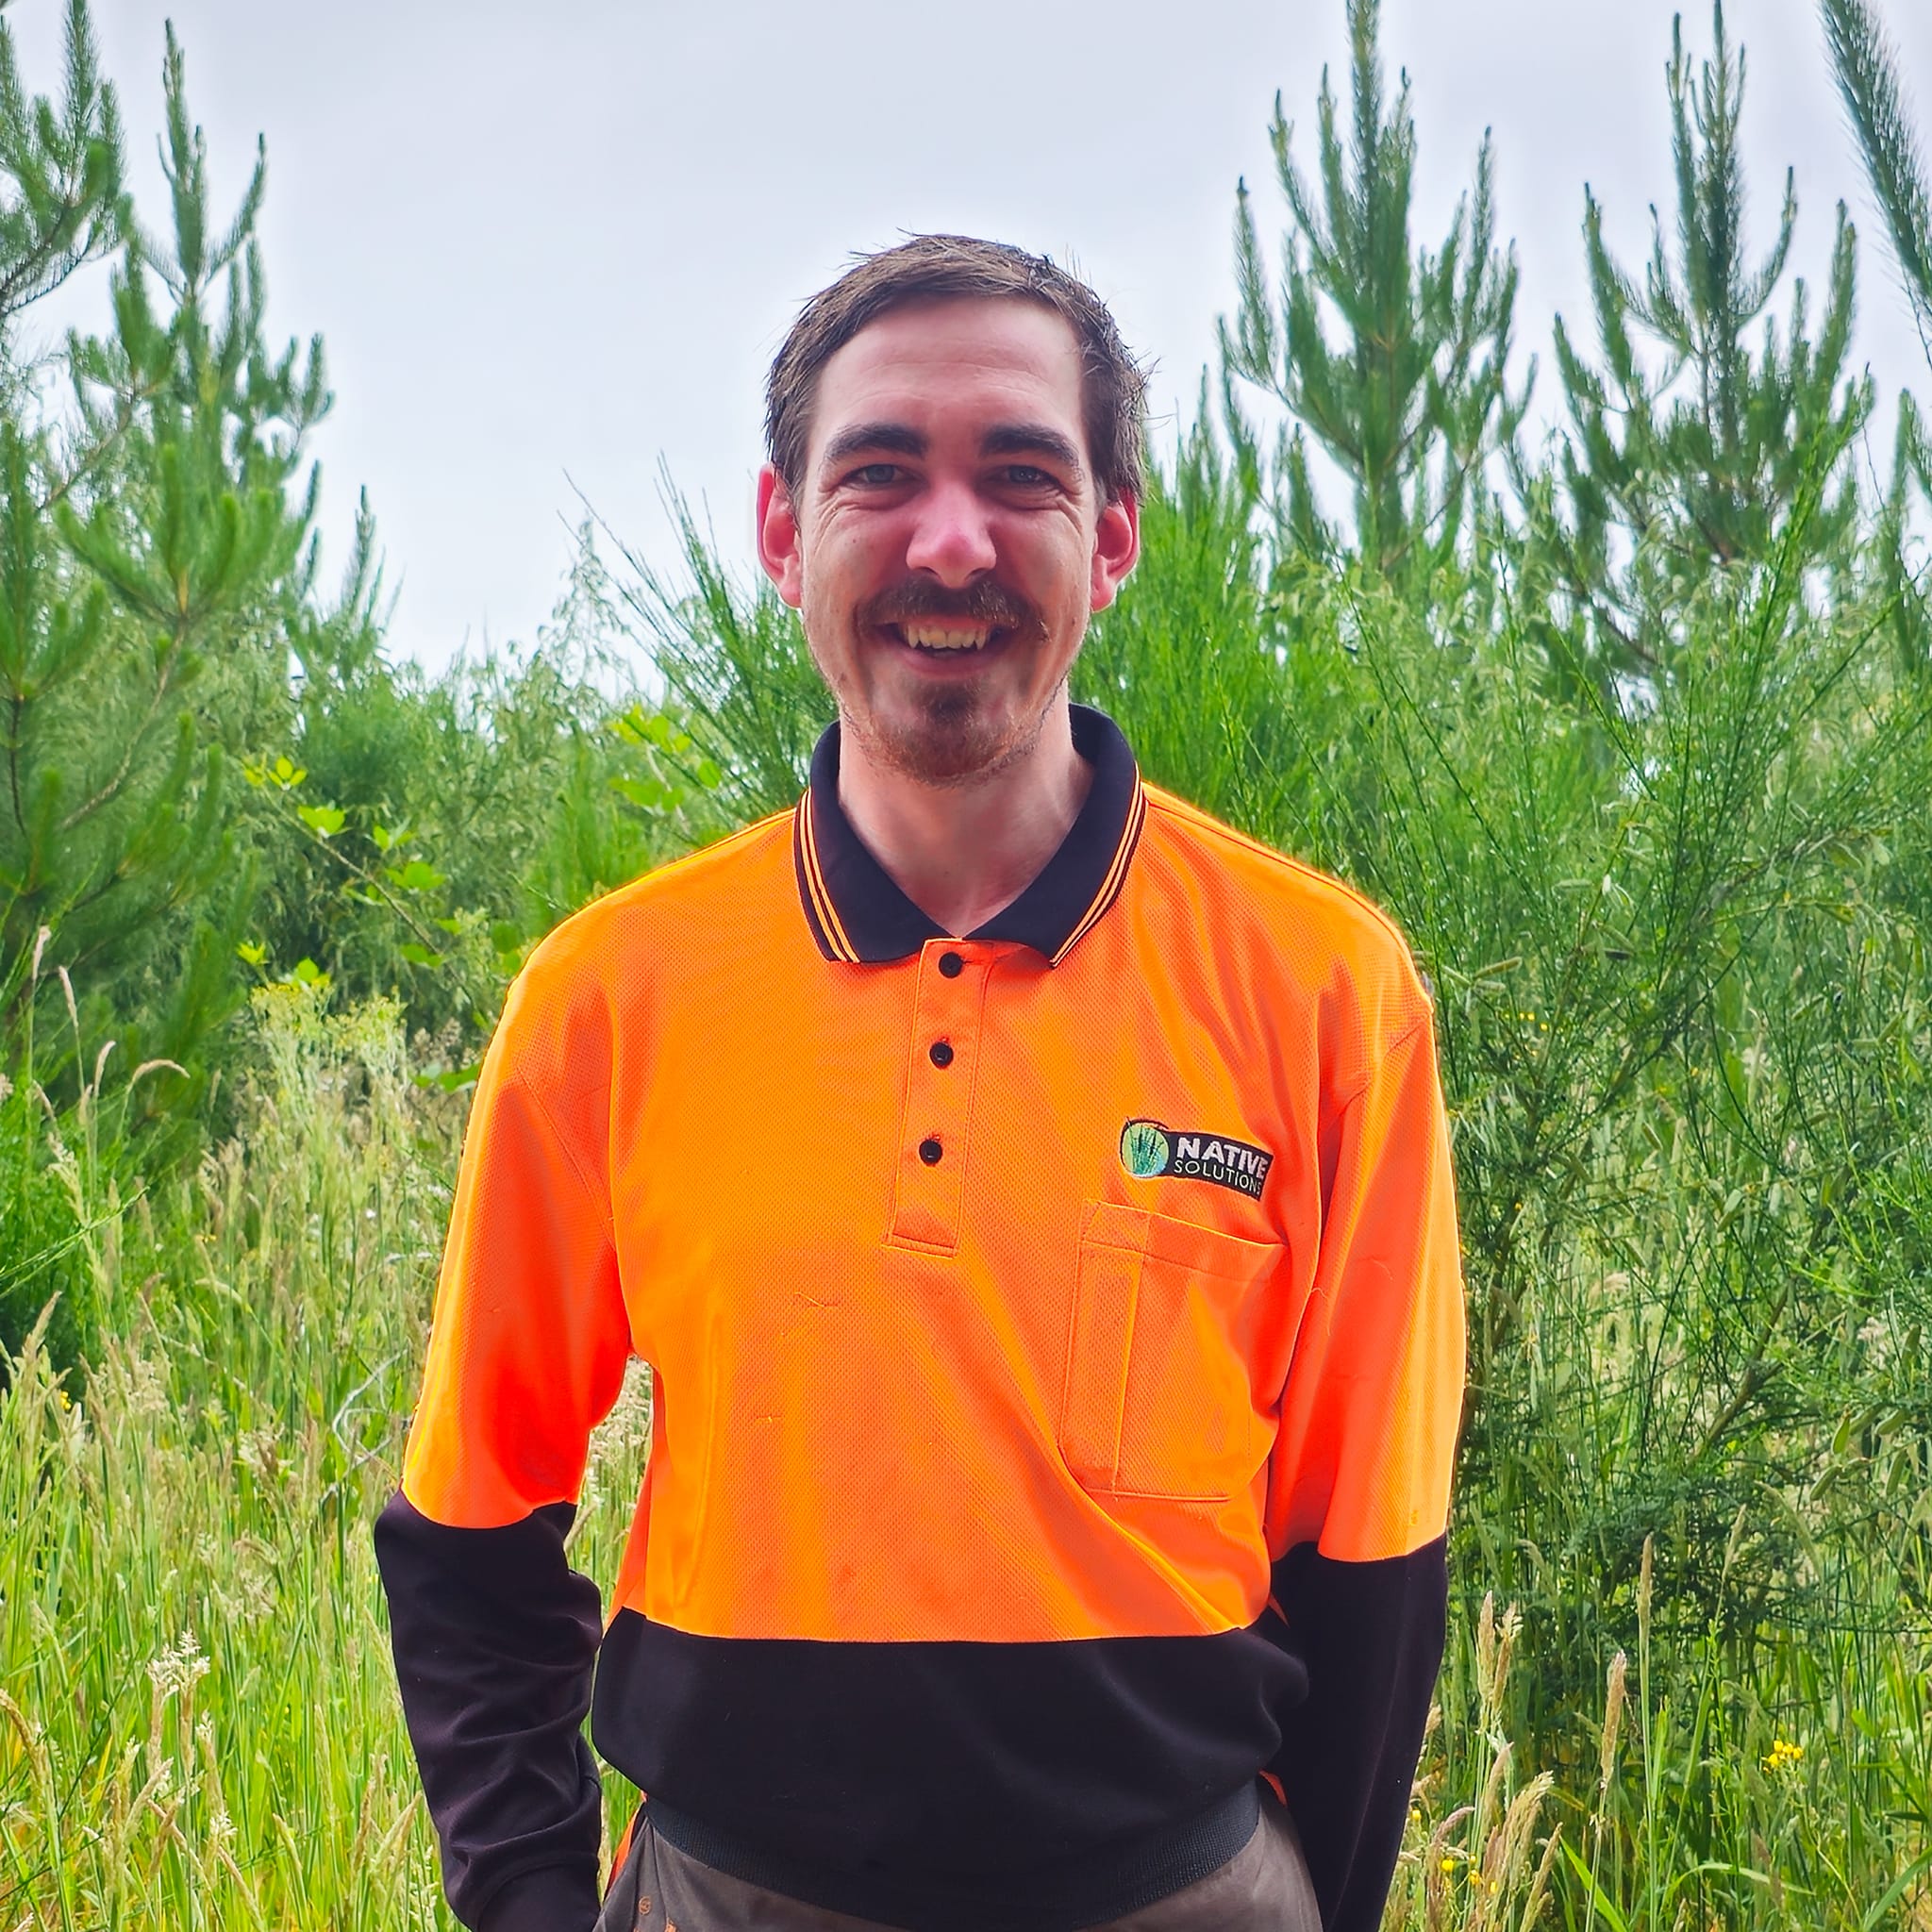 Native Solutions team member providing forestry and land projects, offering expertise in Marlborough, Canterbury, Christchurch, Kaikoura, West Coast, Otago